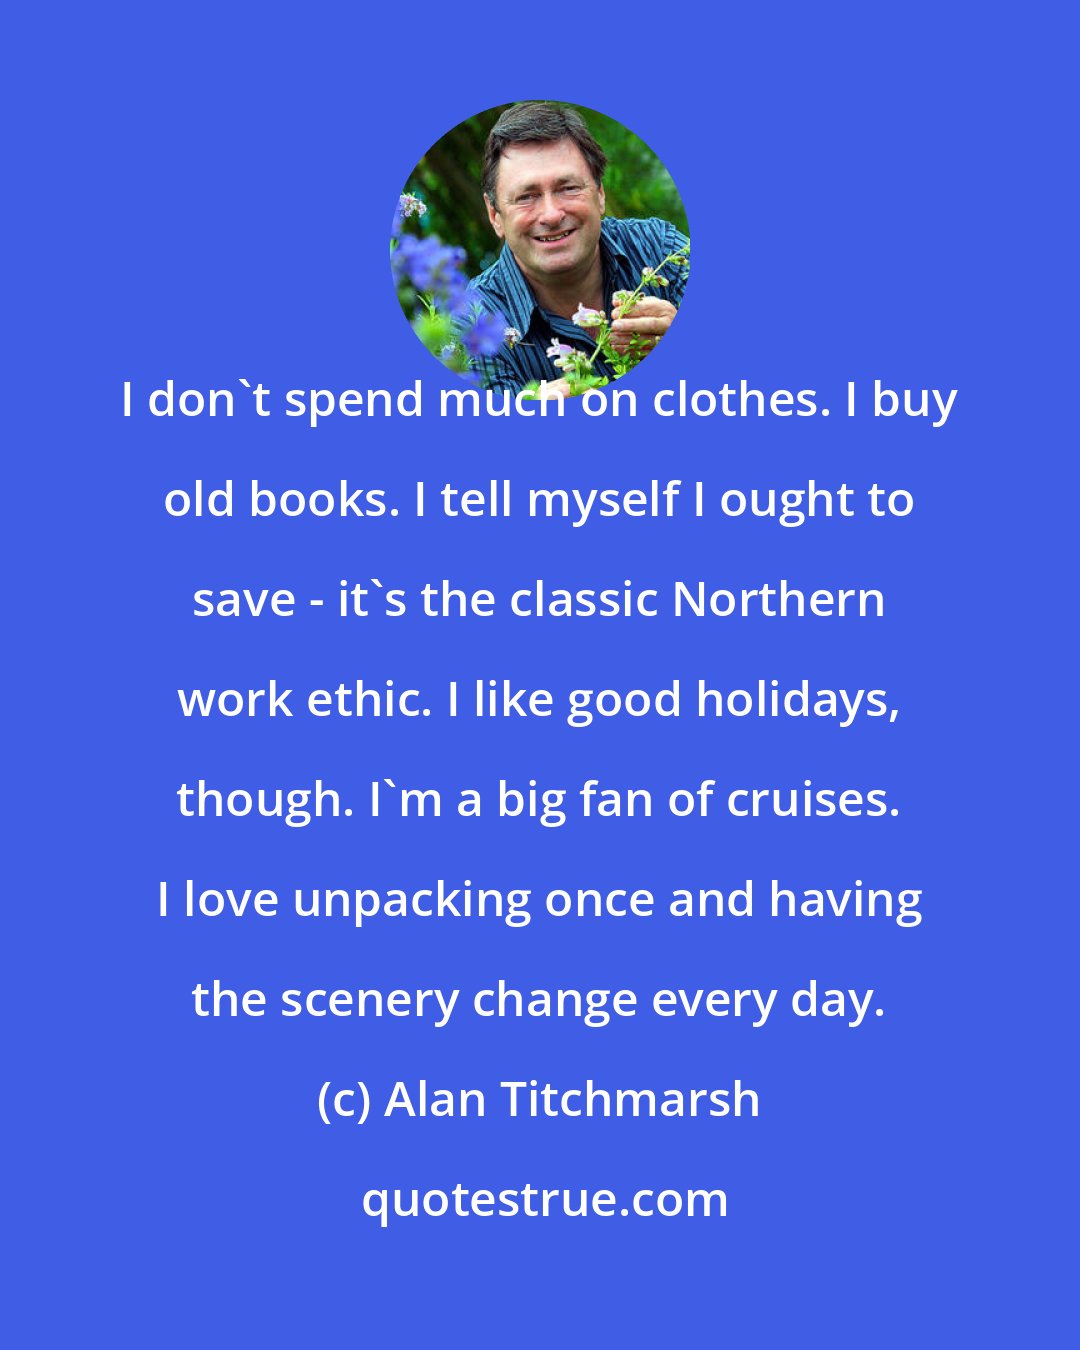 Alan Titchmarsh: I don't spend much on clothes. I buy old books. I tell myself I ought to save - it's the classic Northern work ethic. I like good holidays, though. I'm a big fan of cruises. I love unpacking once and having the scenery change every day.